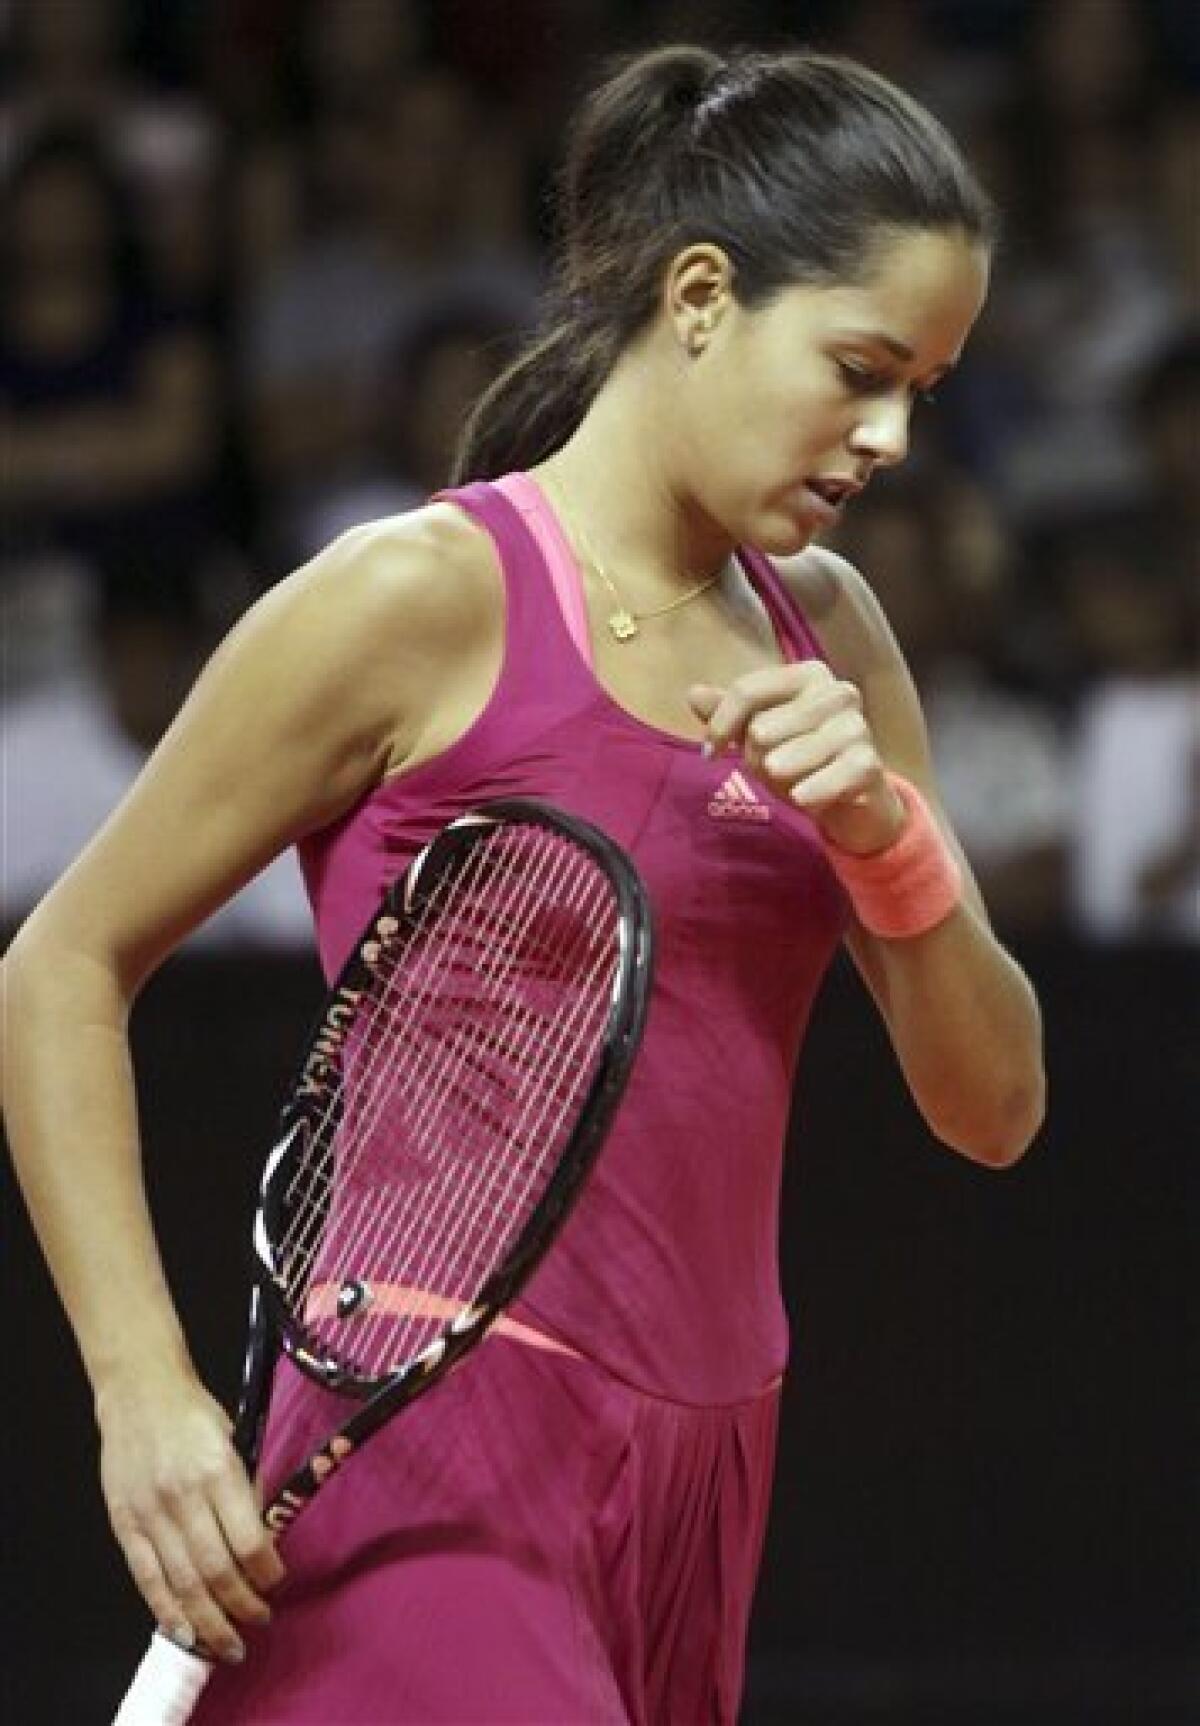 Ana Ivanovic of Serbia reacts after she won a point against Nadia Petrova of Russia during the Bali Tournament of Champions semifinal tennis match in Nusa Dua, Bali, Indonesia, Saturday, Nov. 5, 2011. Ivanovic won, 6-1, 7-5. (AP Photo/Firdia Lisnawati)